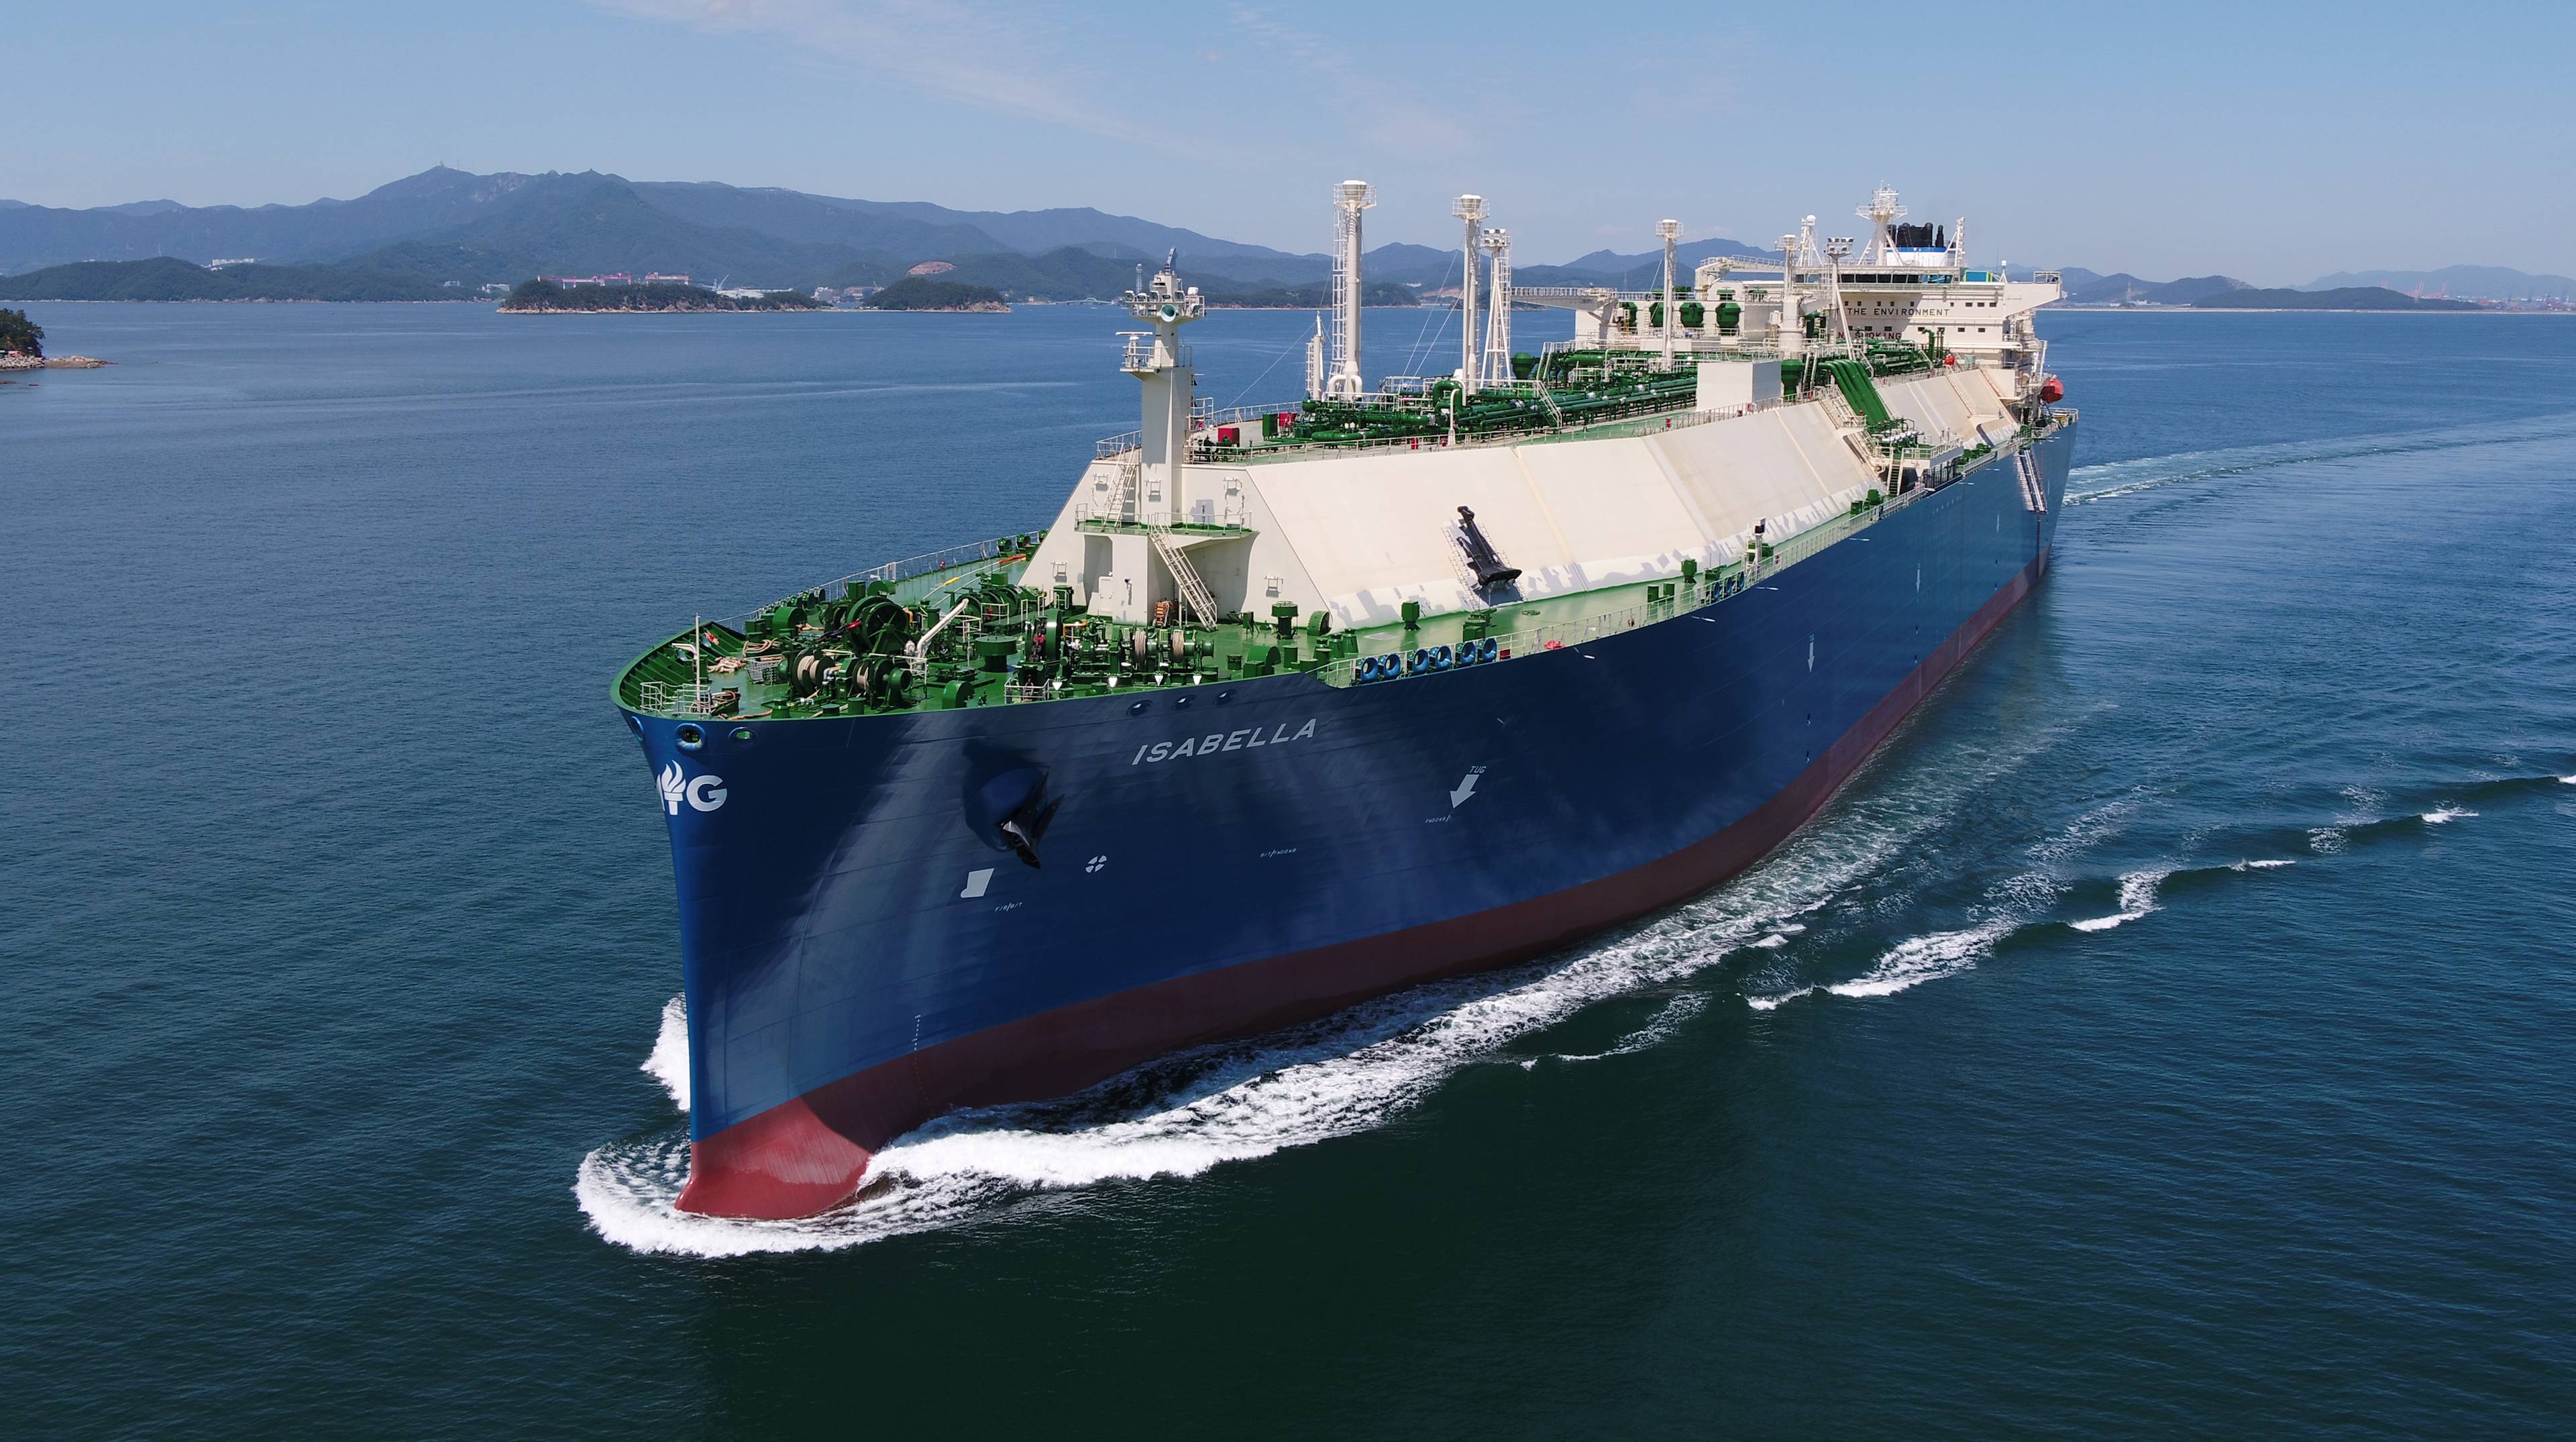 The Isabella LNG tanker